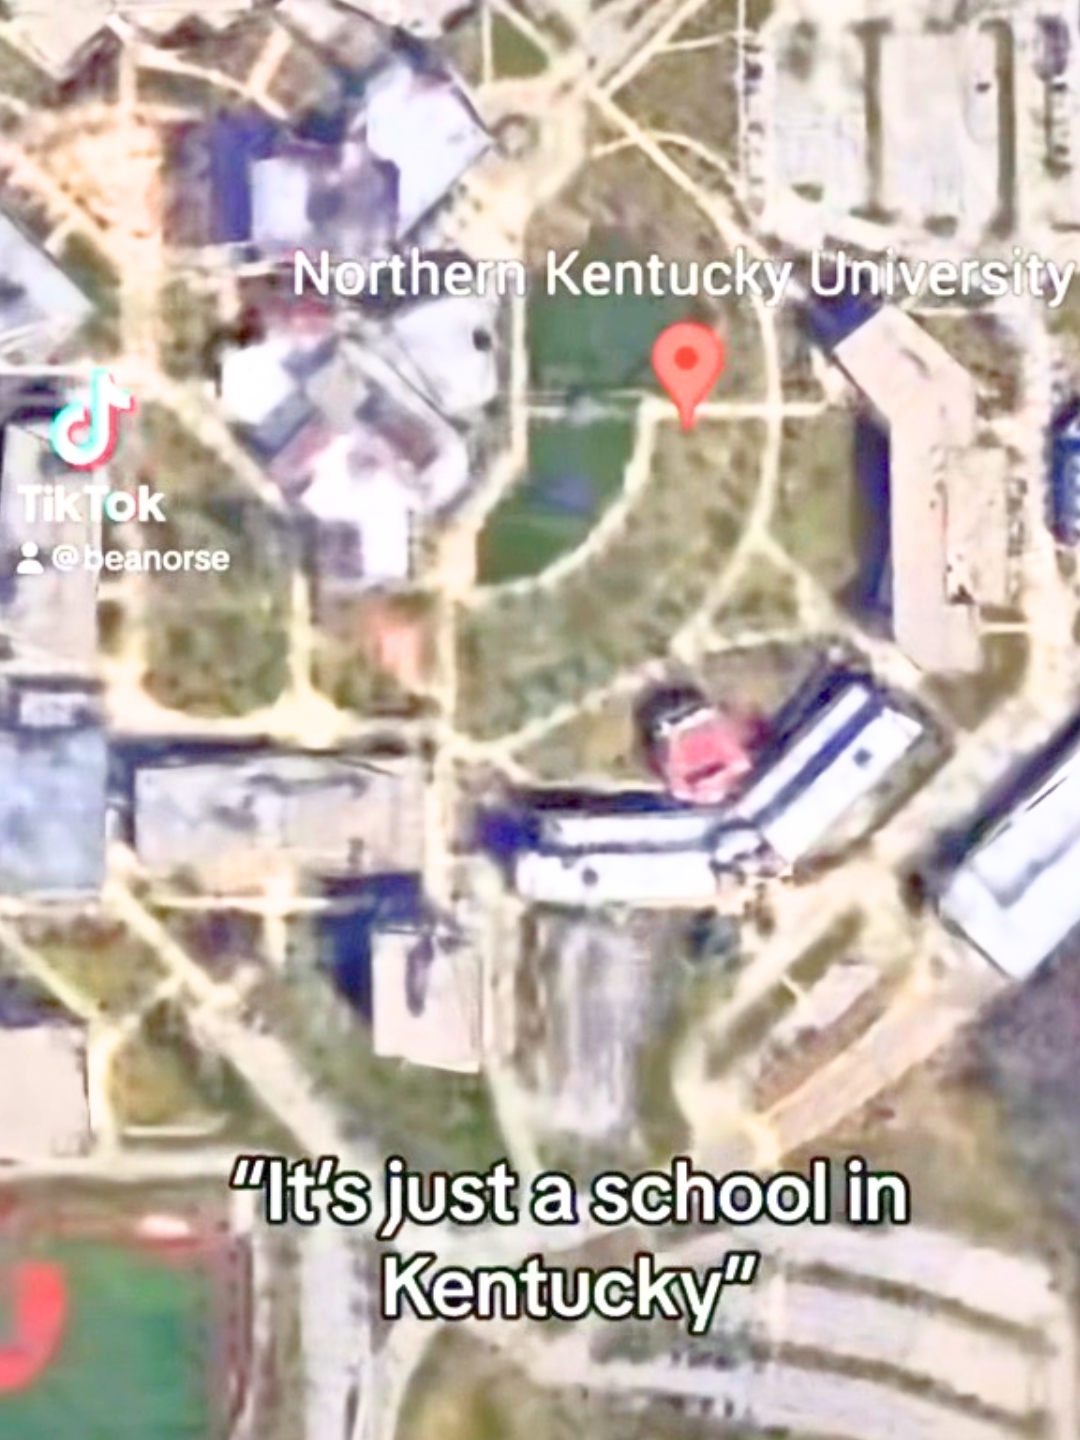 So much more than just a school in Kentucky